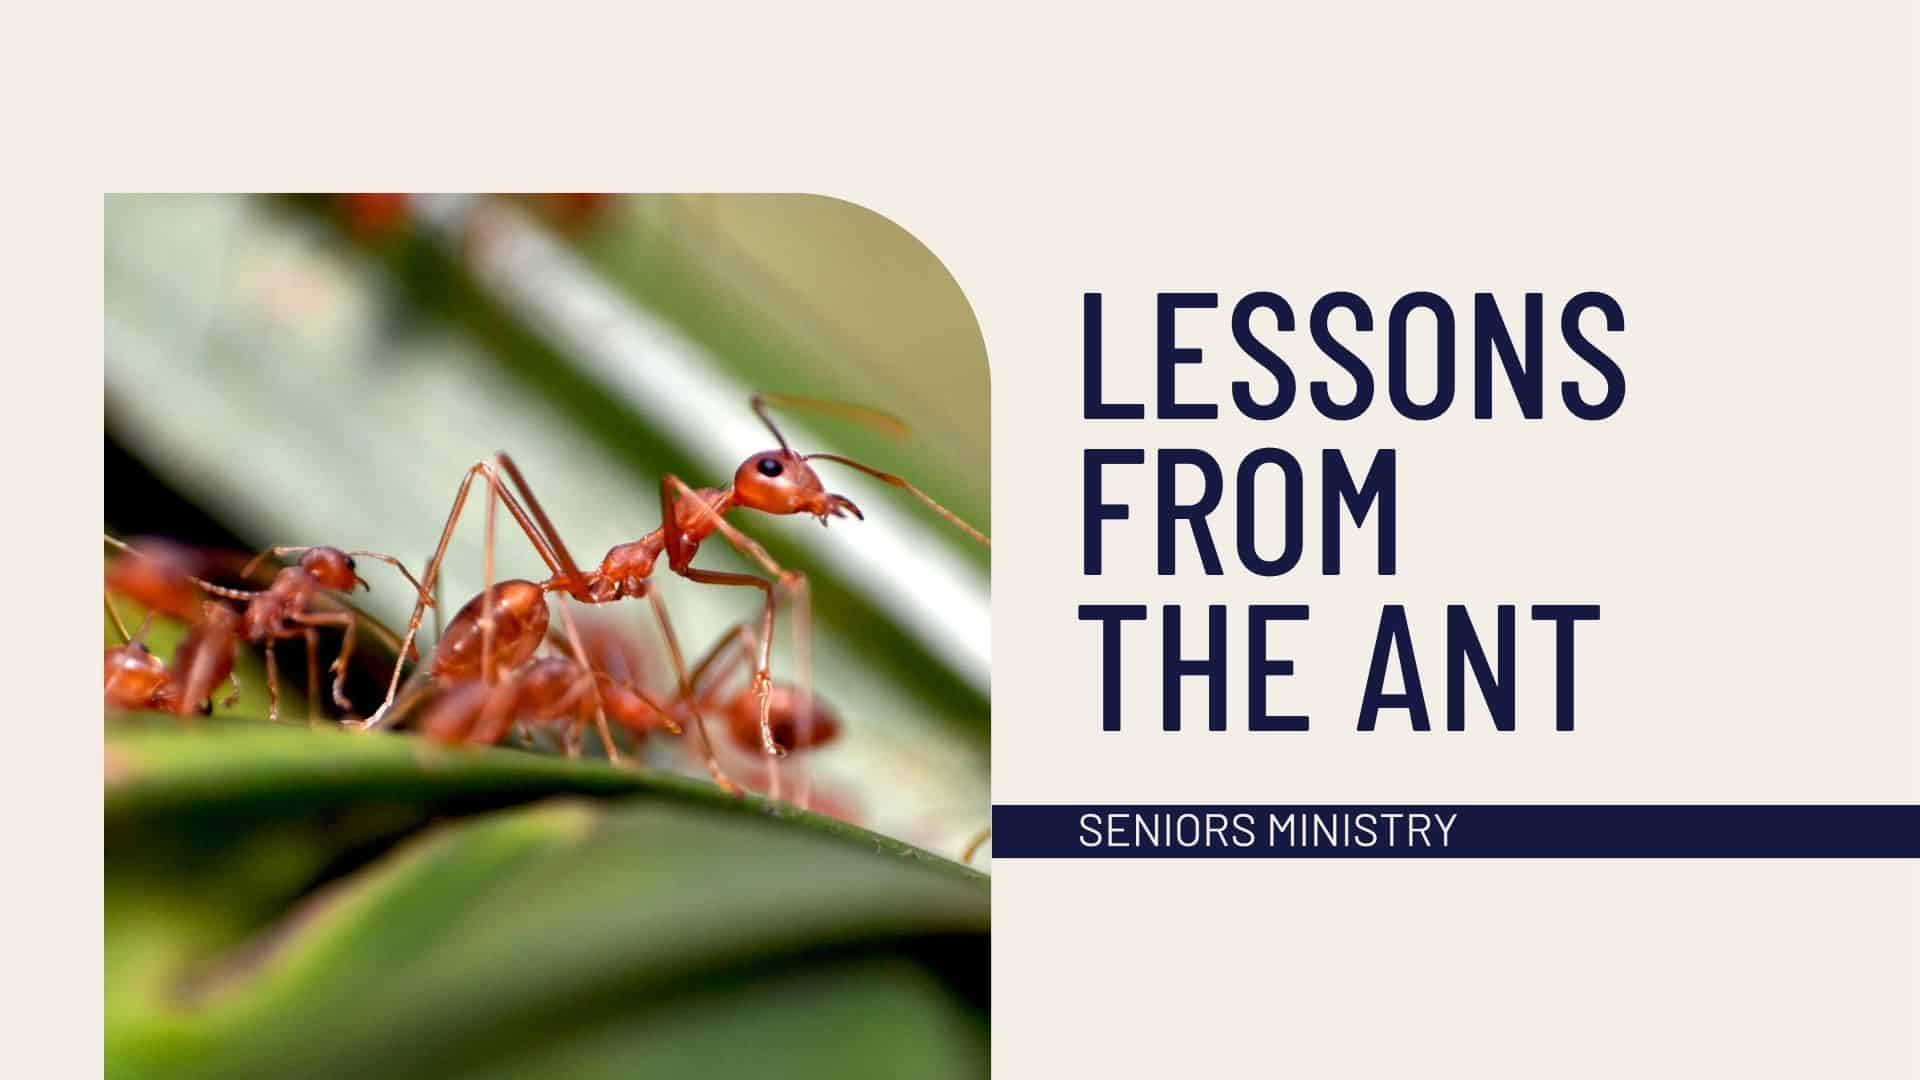 Lessons from the ant. Seniors Ministry. Image of ants on a leaf.